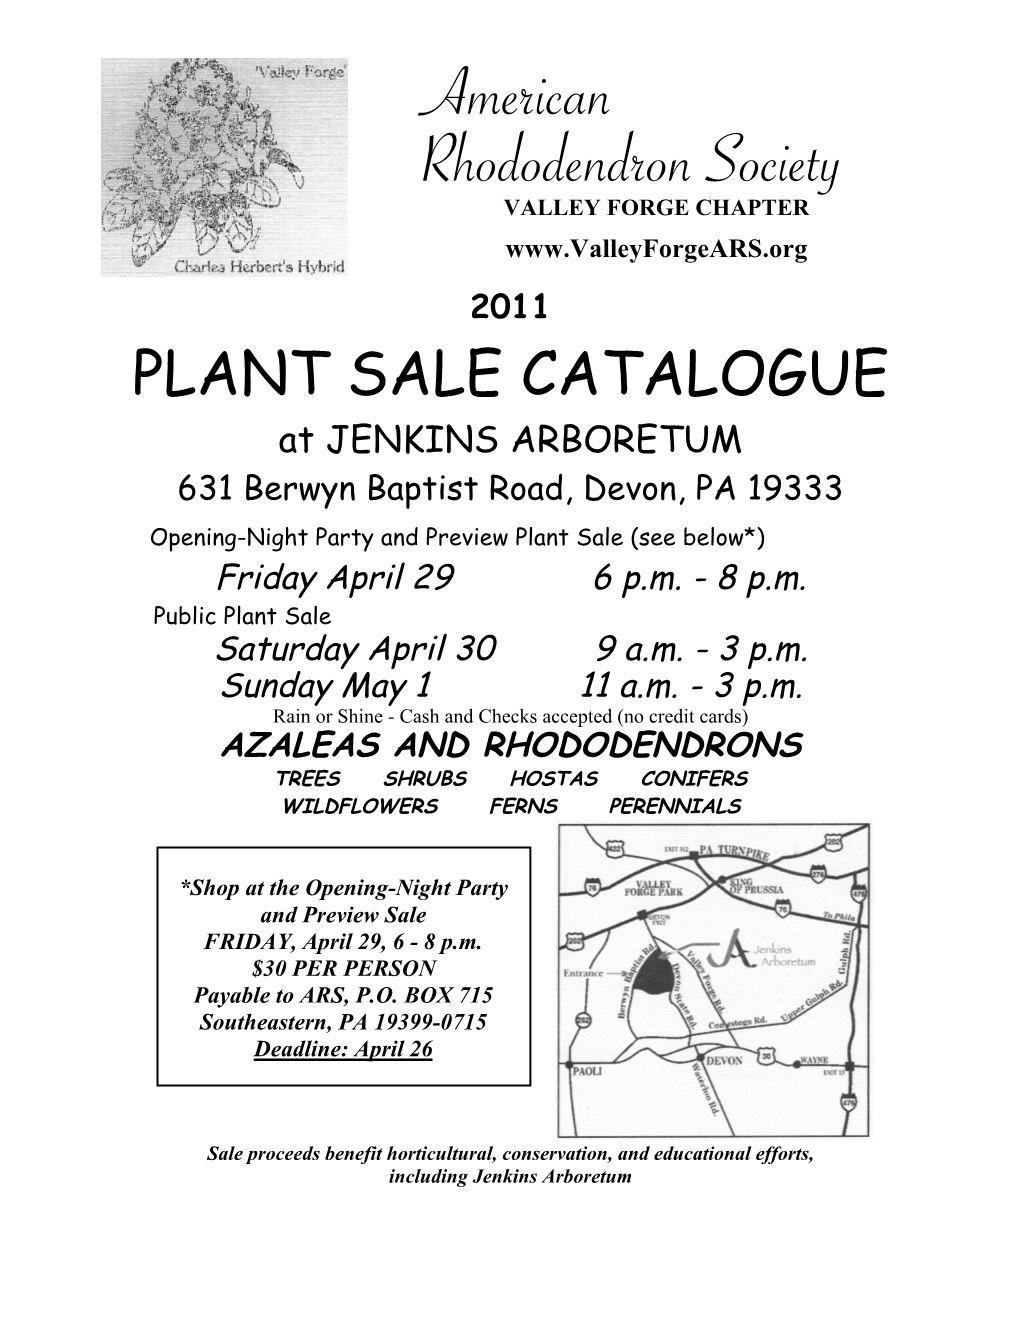 American Rhododendron Society